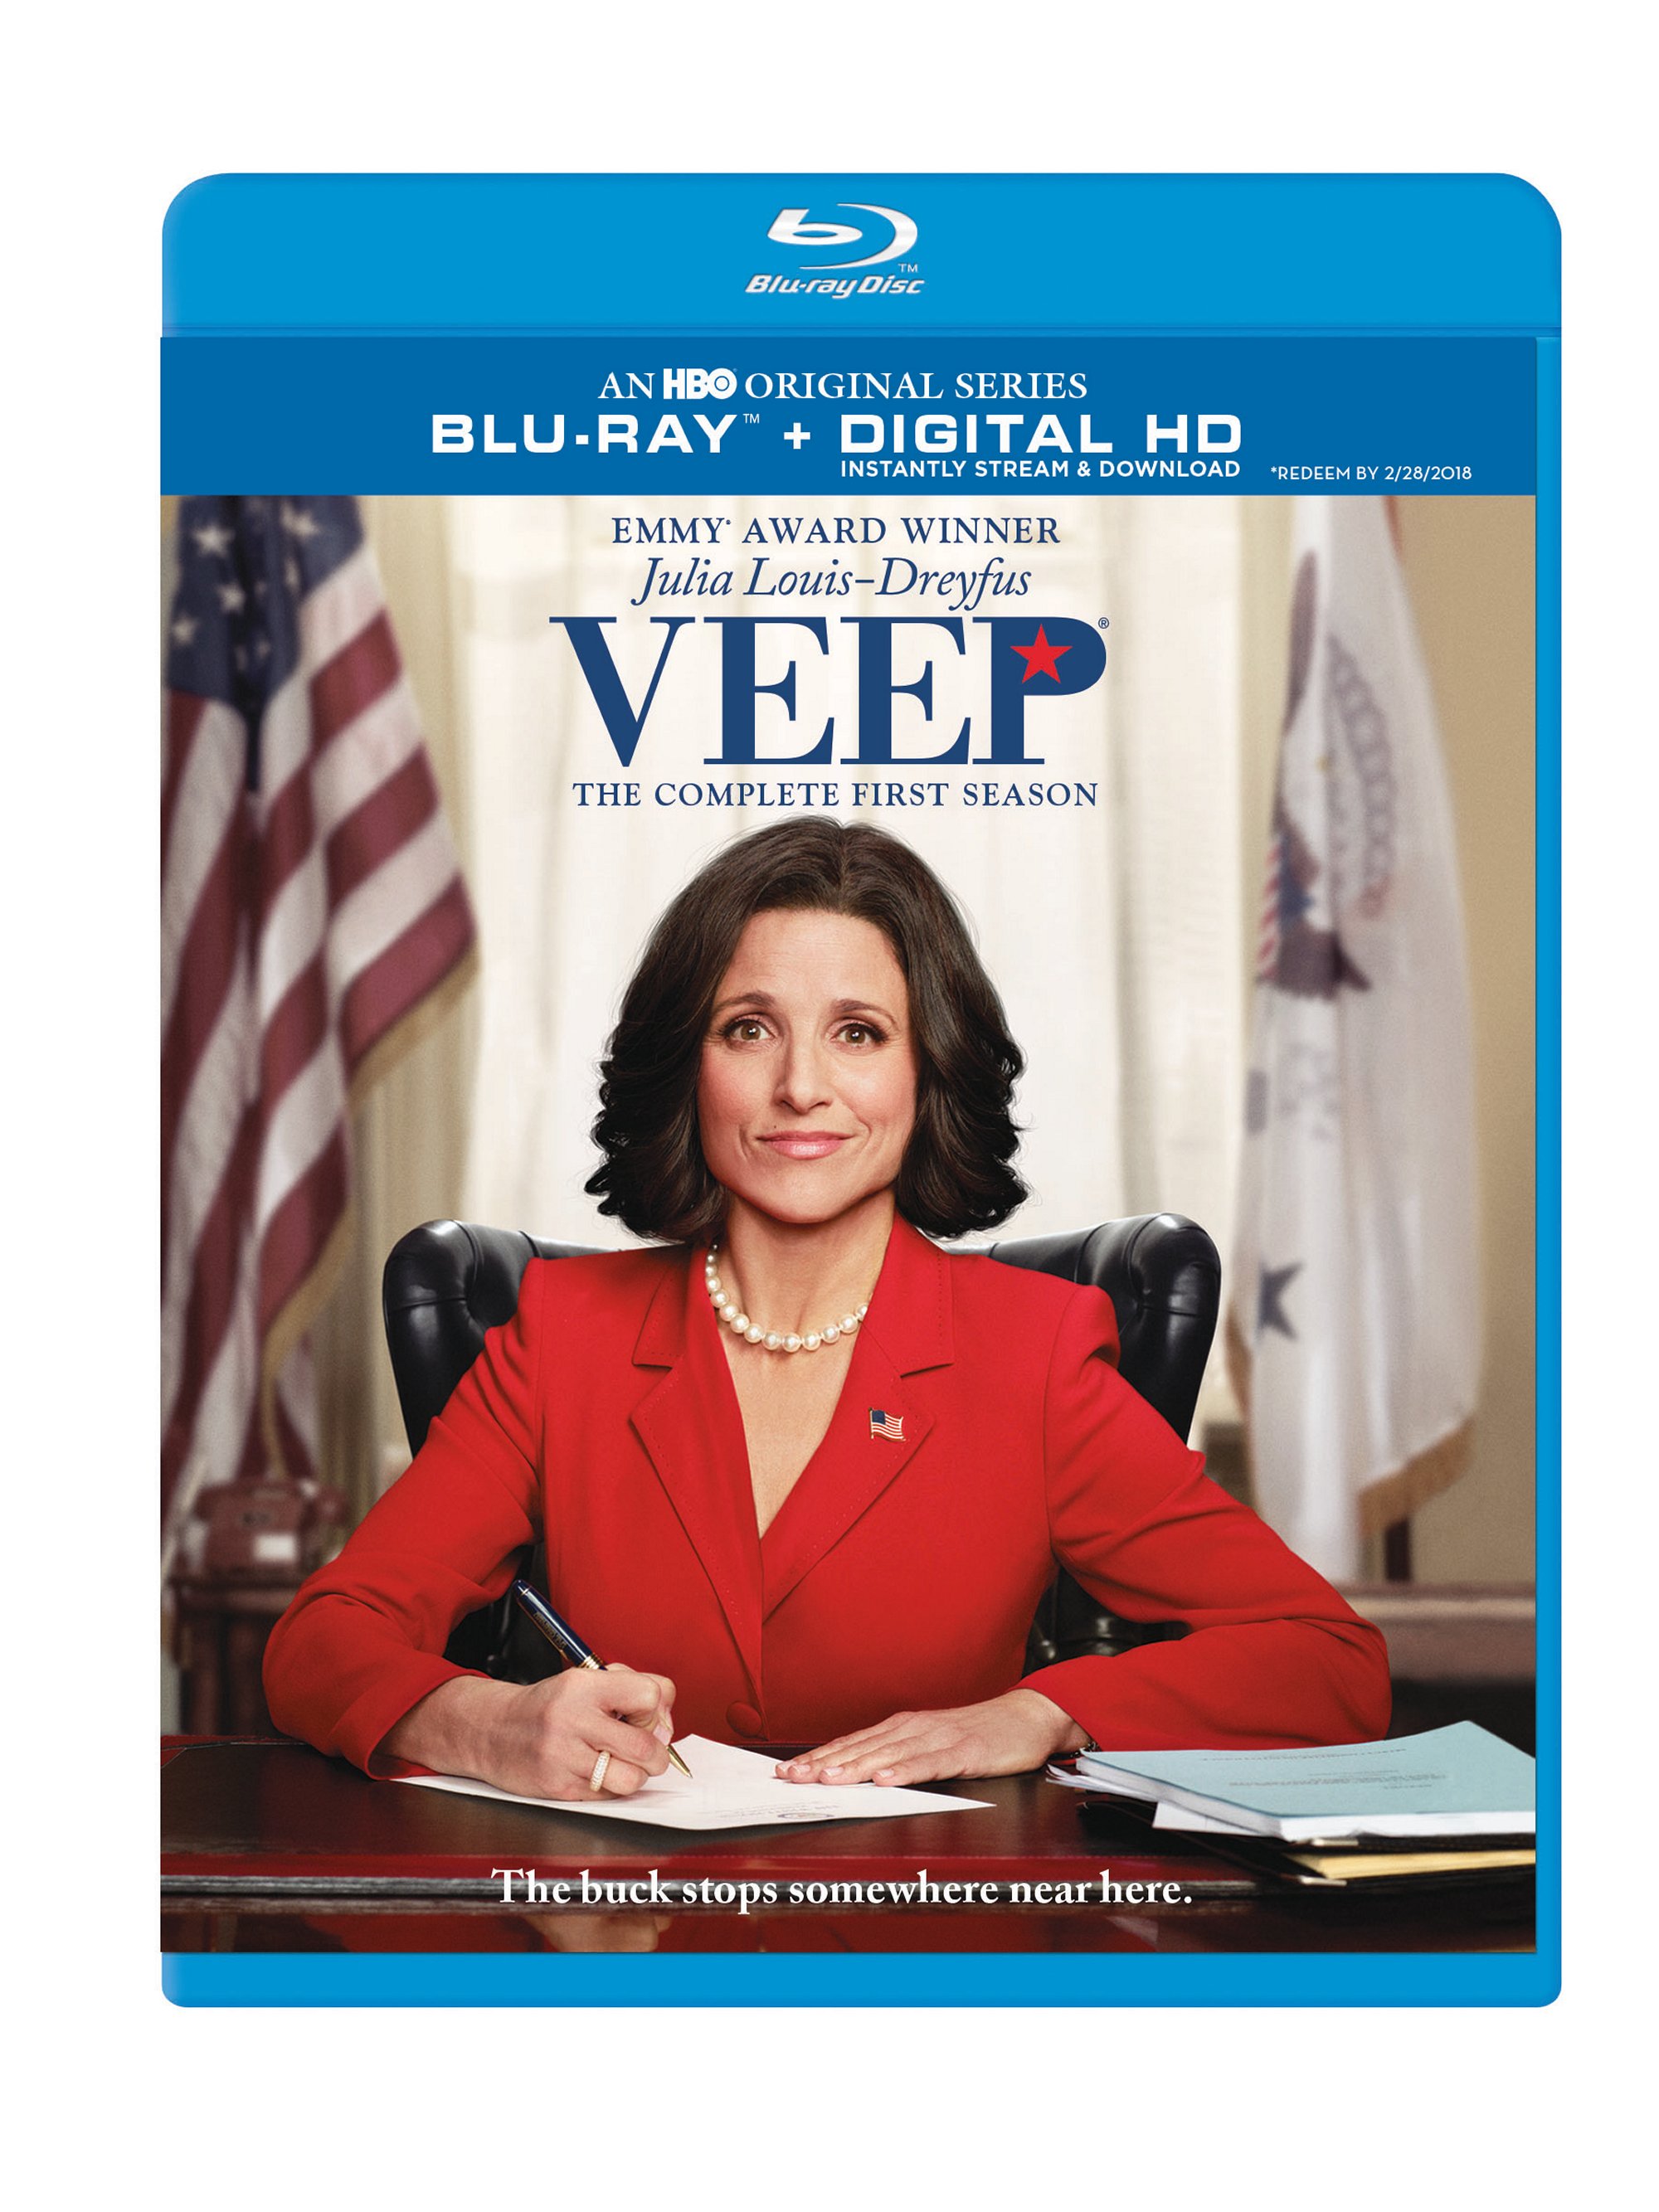 Veep: The Complete First Season - Blu-ray [ 2012 ]  - Comedy Television On Blu-ray - TV Shows On GRUV